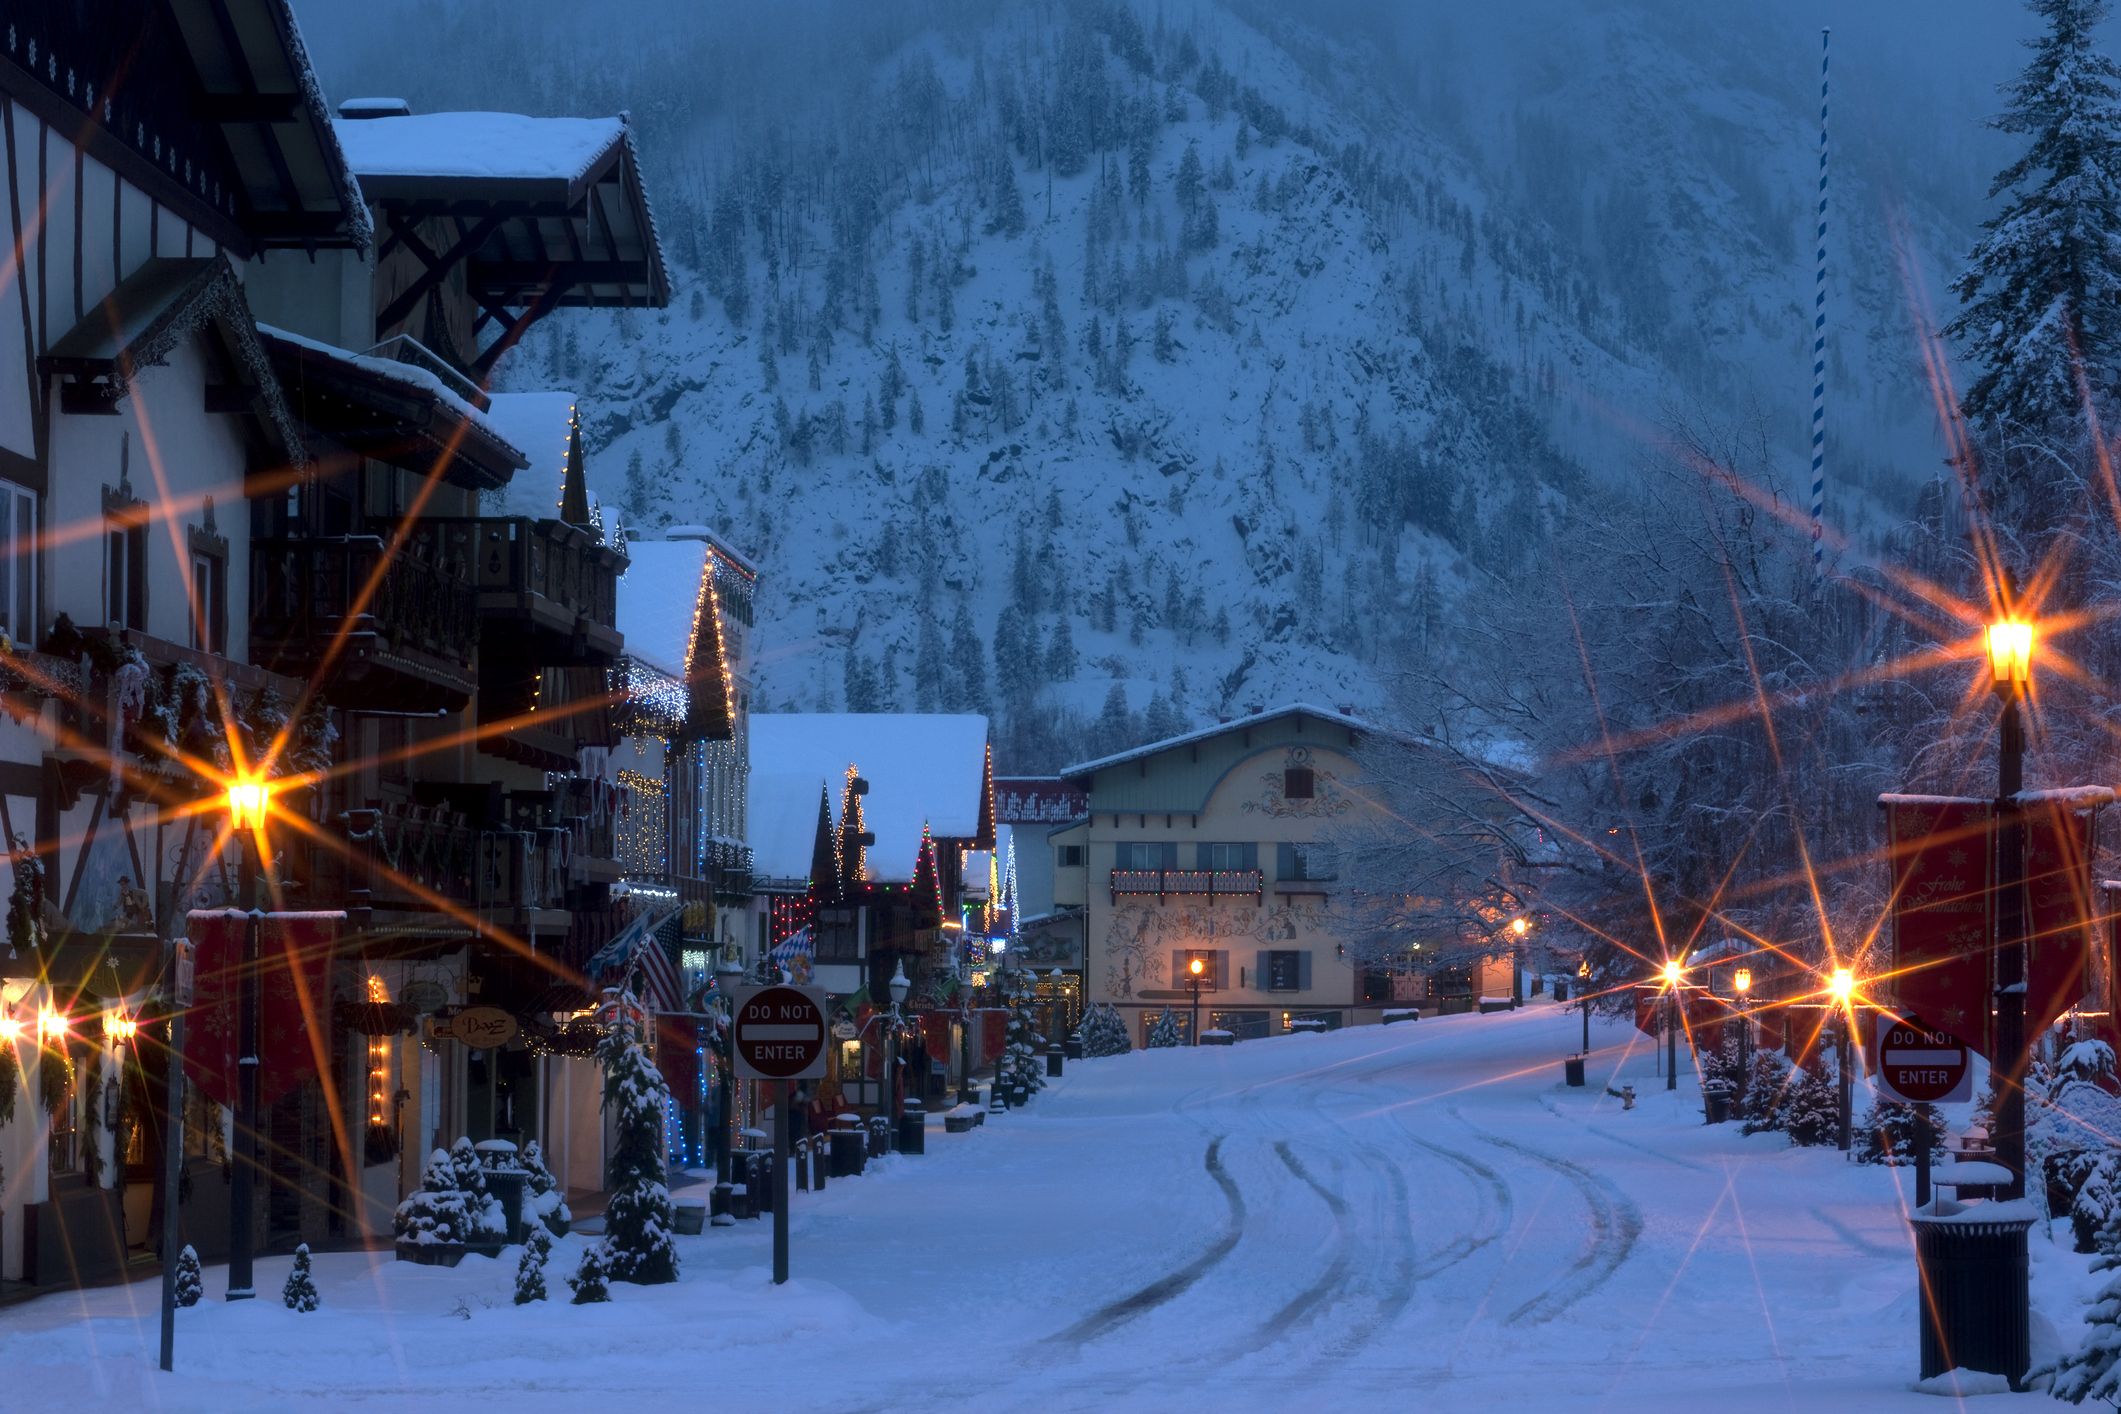 30 Charming Christmas Towns 2022 - Best Christmas Cities in U.S.